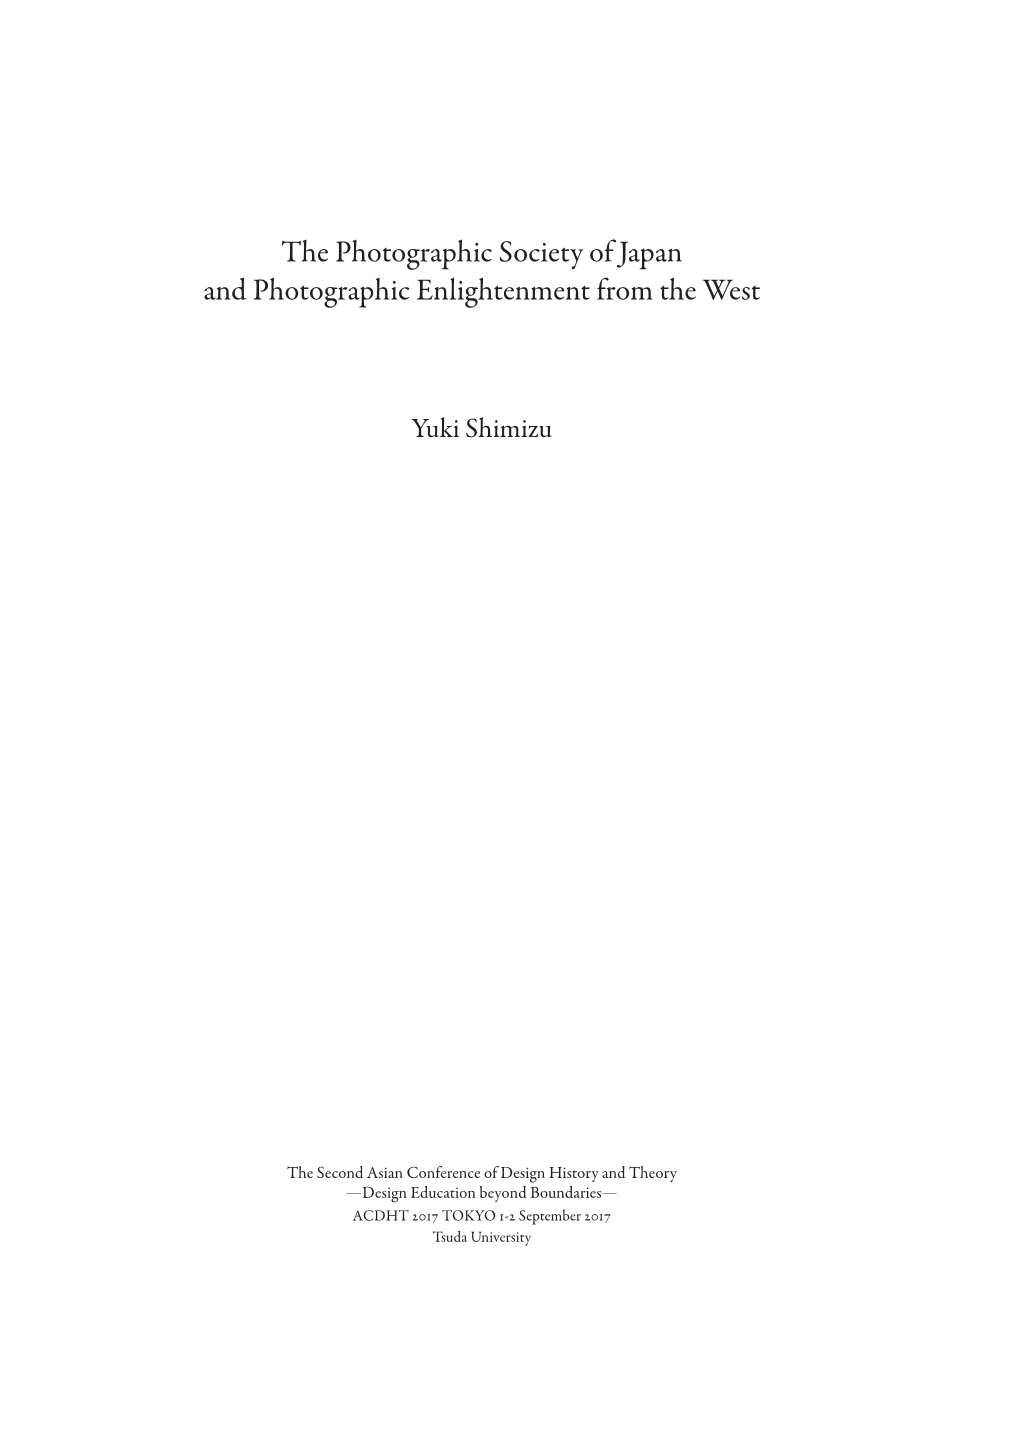 The Photographic Society of Japan and Photographic Enlightenment from the West